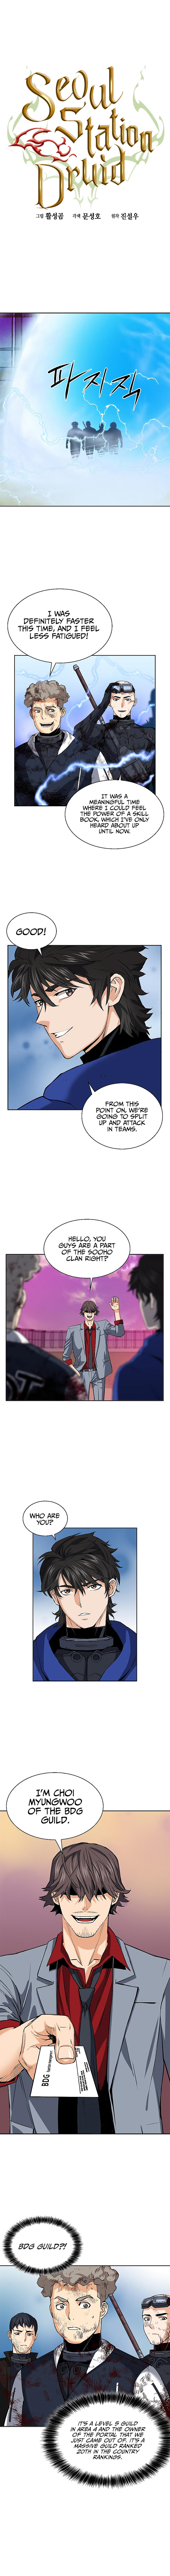 Seoul Station Druid - Chapter 24 Page 2